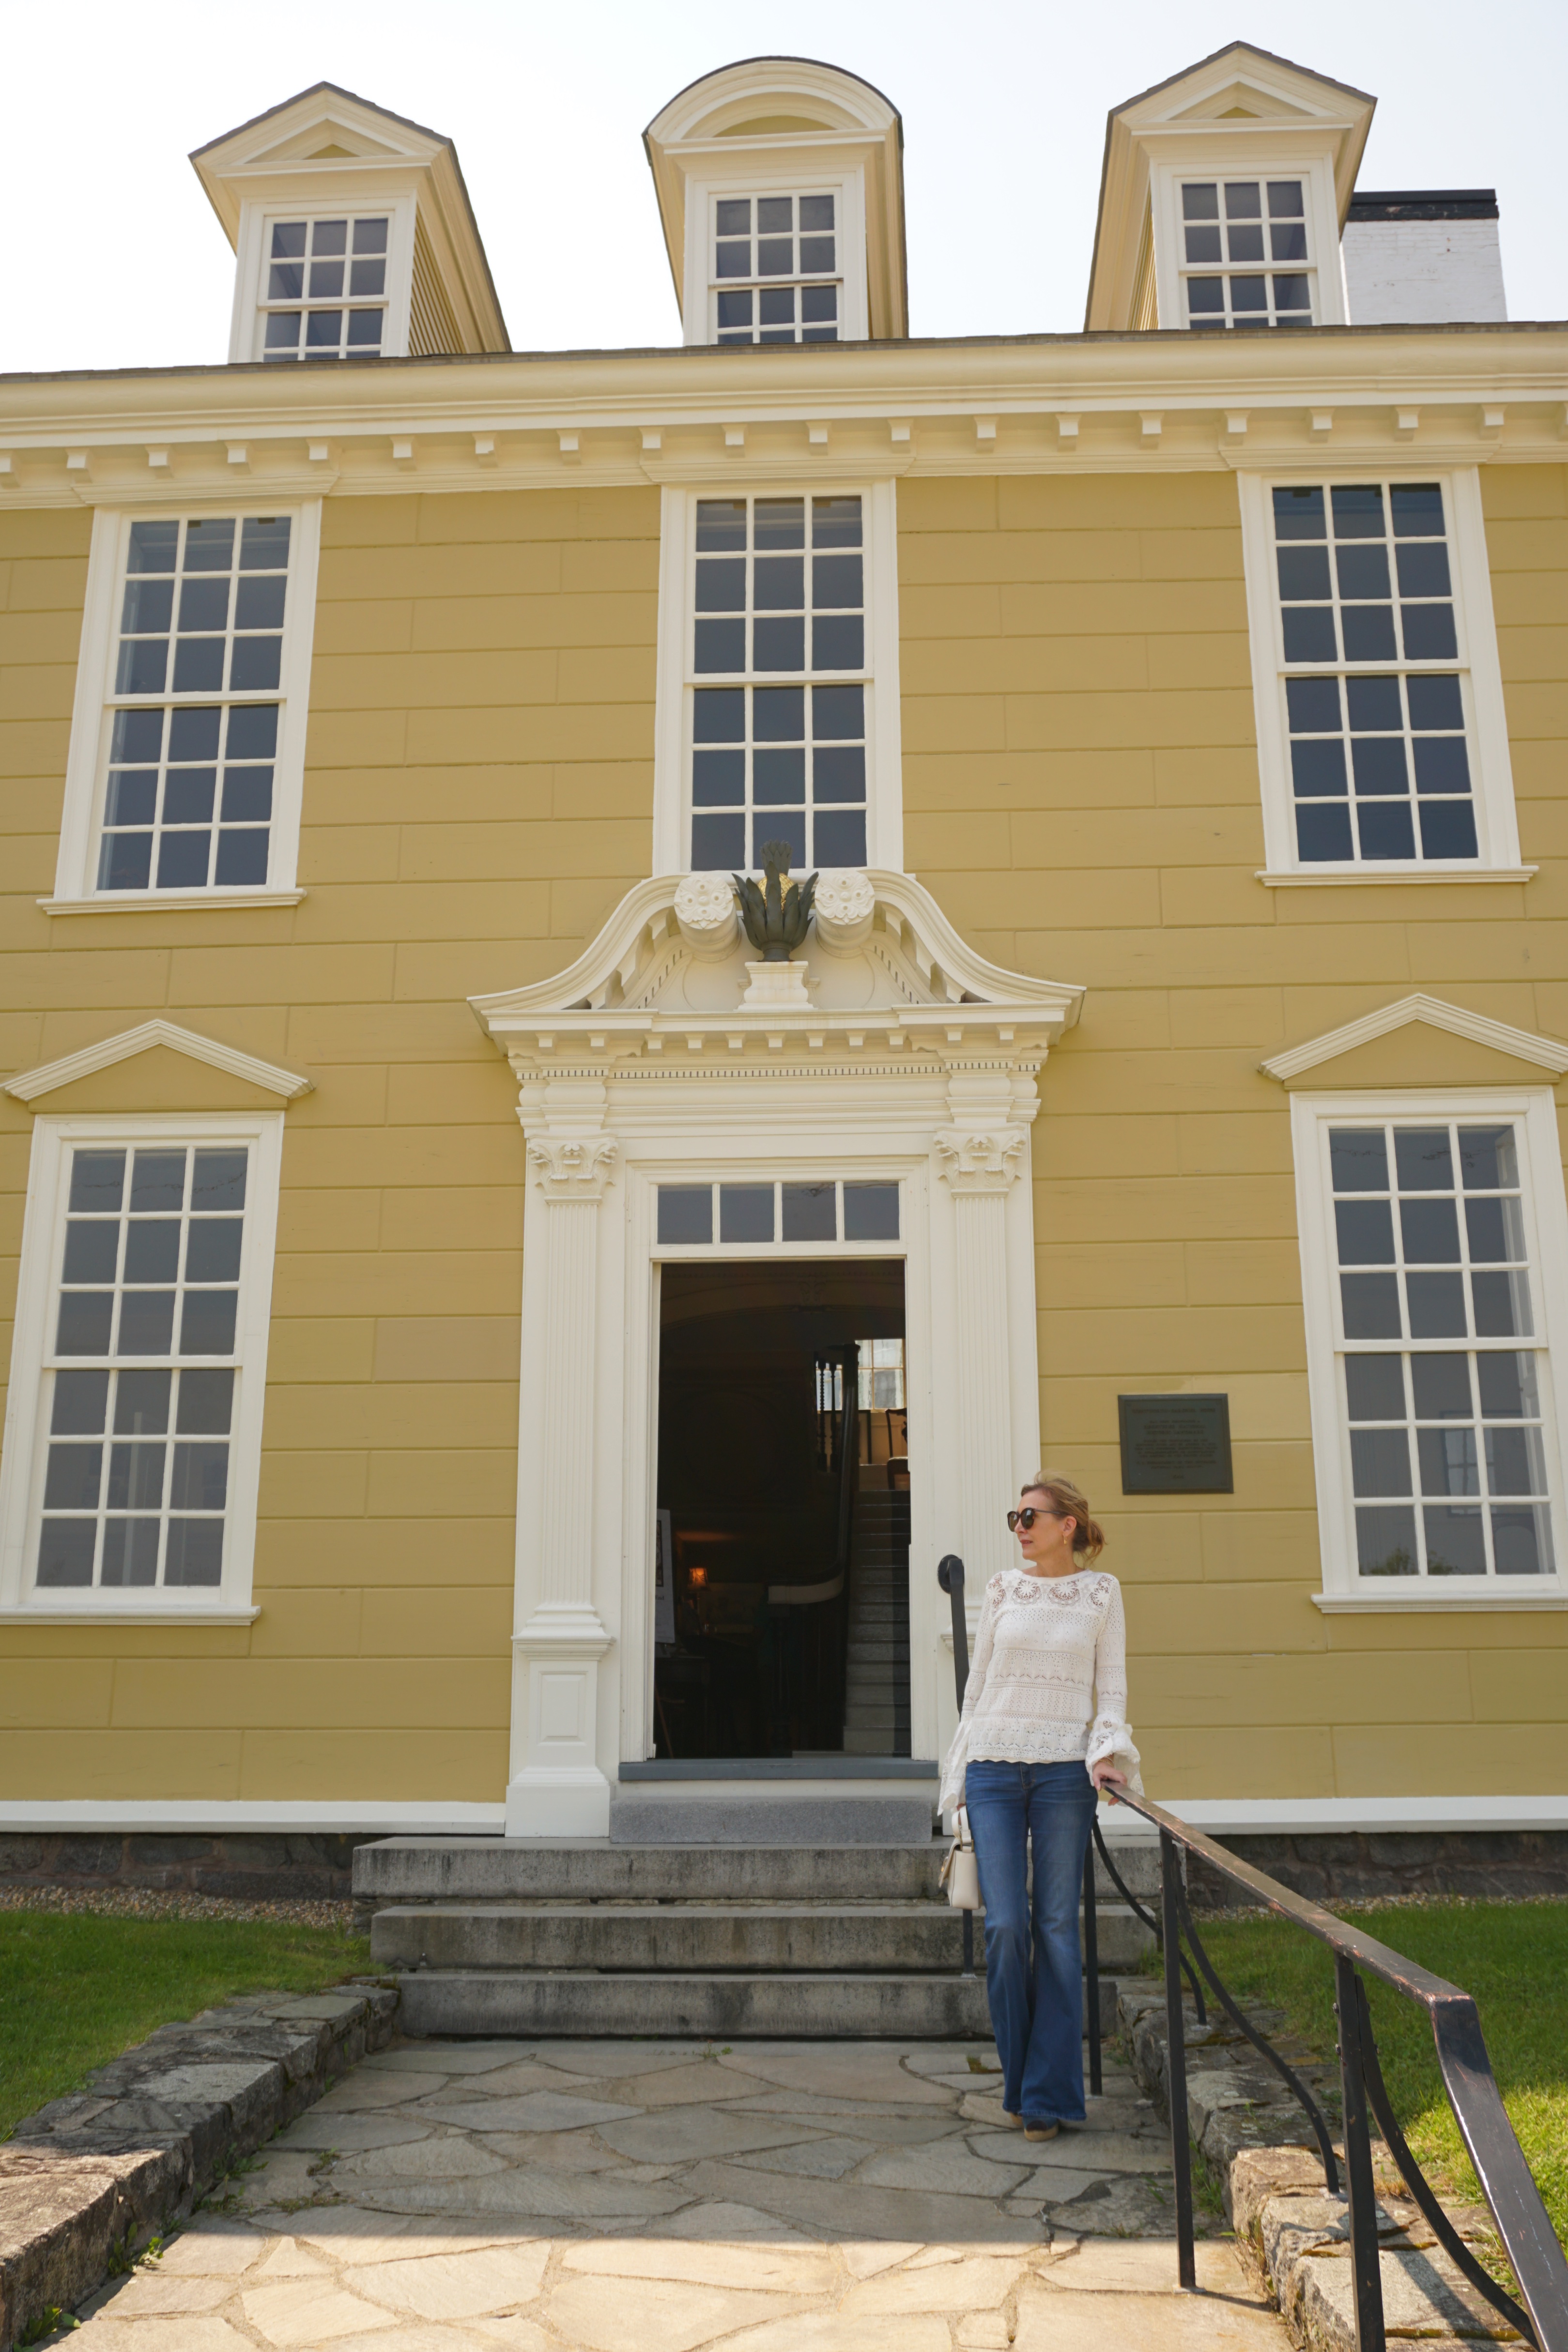 Woman standing in front of historic yellow building